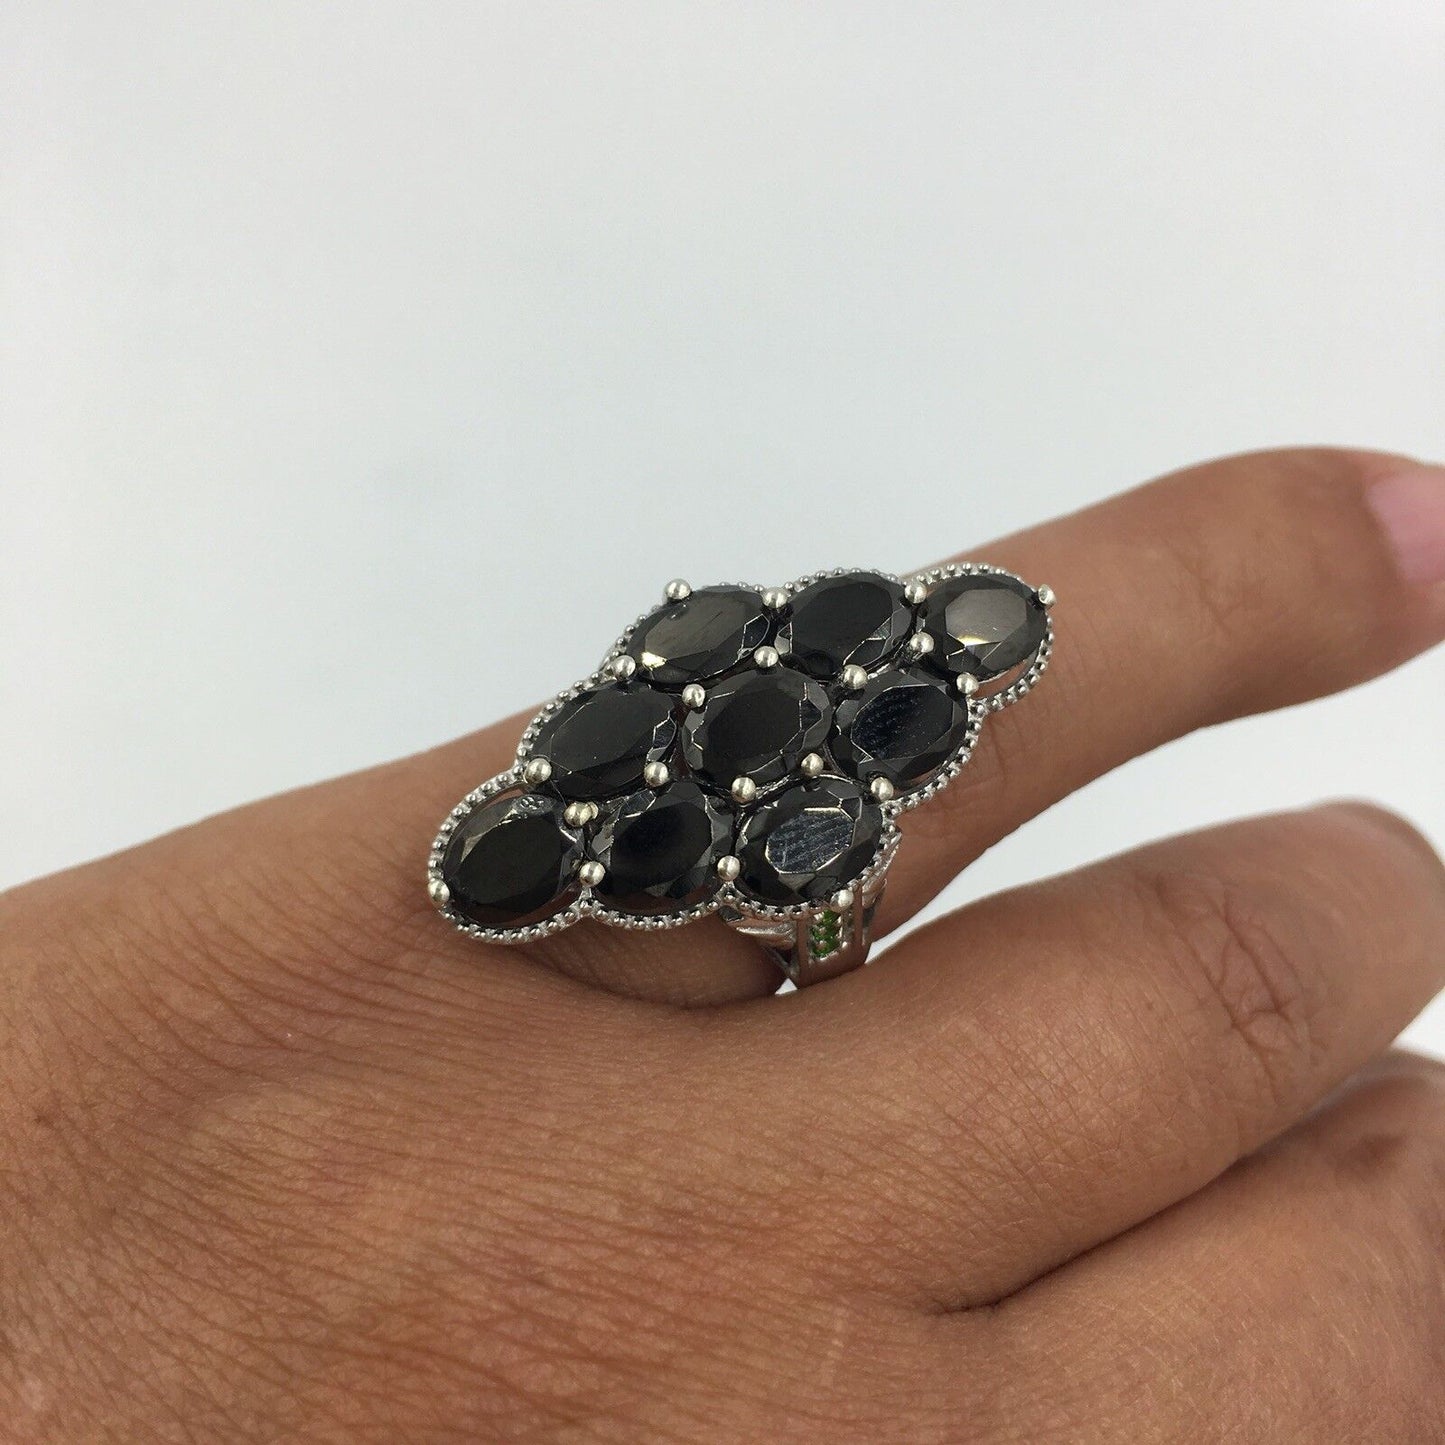 Sts Chuck Clemency Black Spinel Sterling Silver Ring Size 8